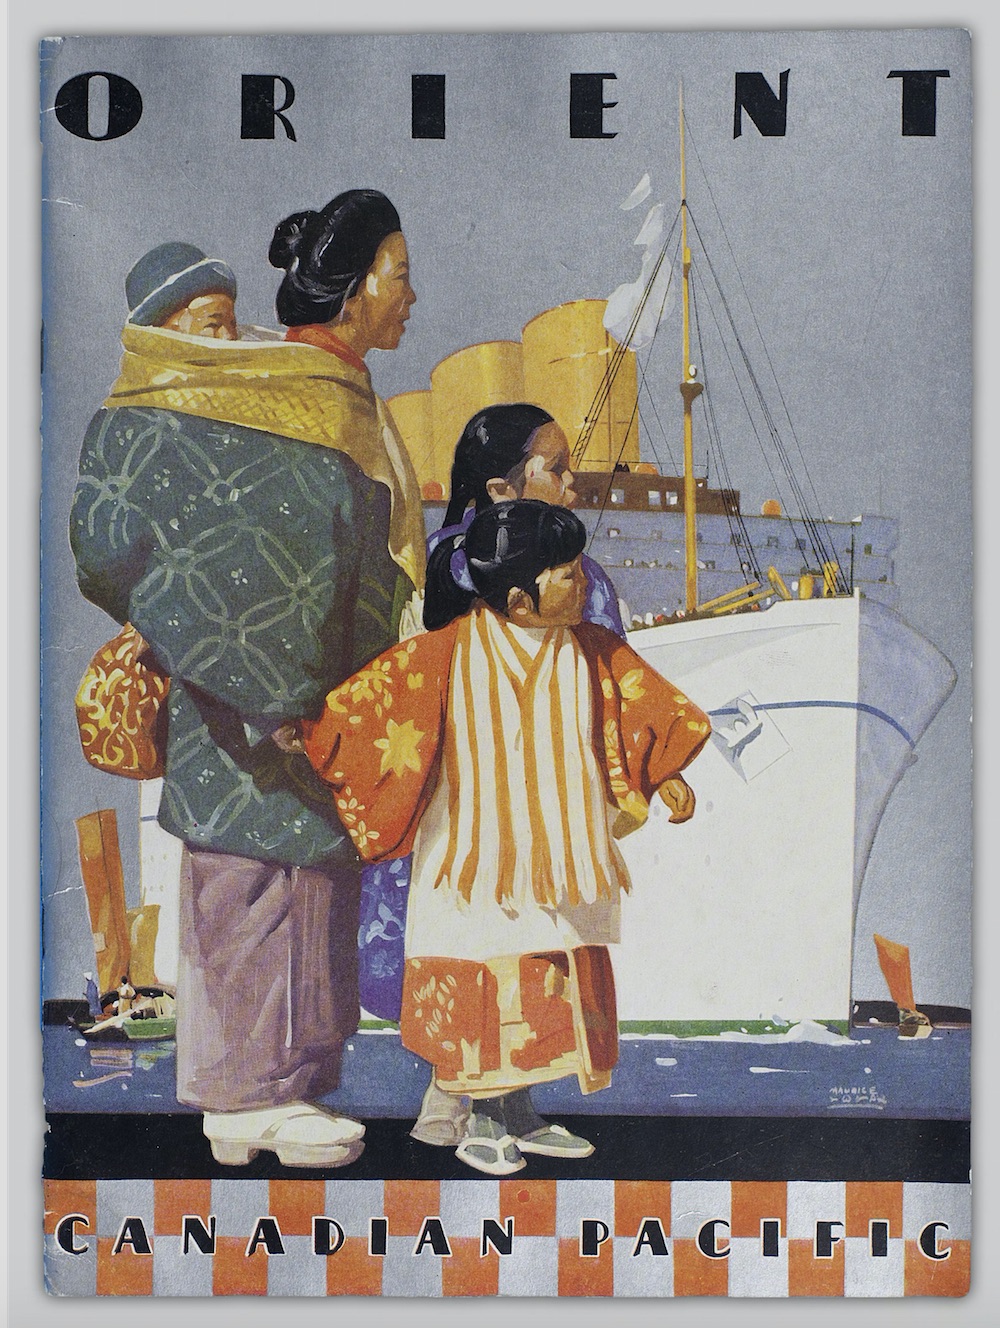 Another illustrated advertisement for Canadian Pacific which depicts a Japanese mother and children superimposed over a cruise liner. The tagline reads "ORIENT."